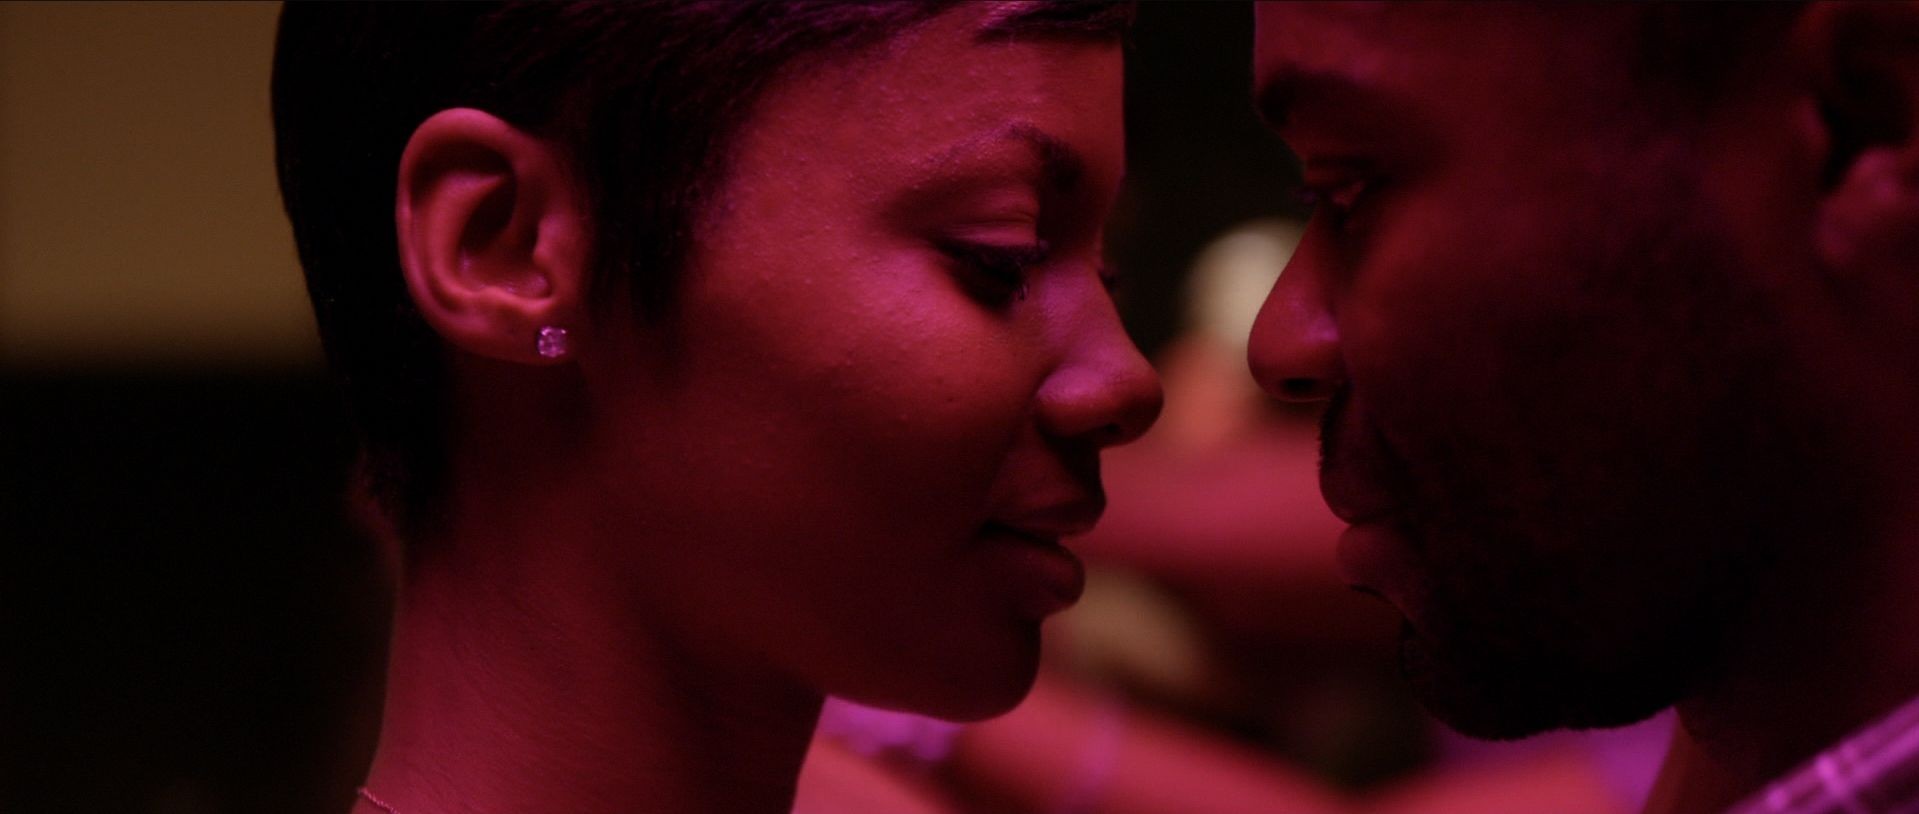 David Oyelowo stars as Brian and Emayatzy Corinealdi stars as Ruby in Participant Media's Middle of Nowhere (2012)